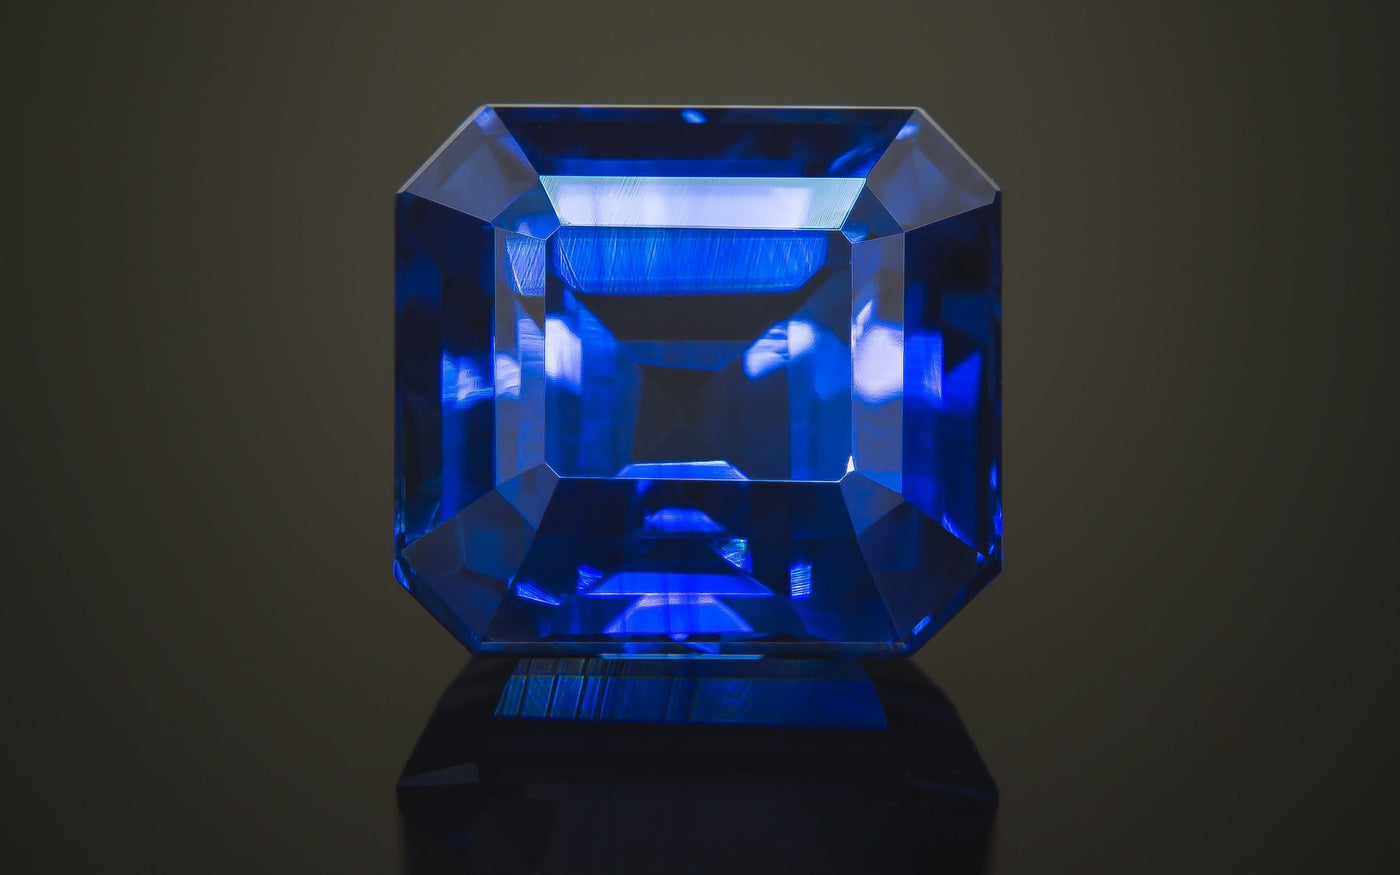 BESPOKE UNHEATED NATURAL FINE EARTH MINED BLUE  SAPPHIRE FOR COMPETTIVE BEST PRICE IN THE WORLD FROM YOUR TRUSTED SELLER WITH SECURE PAYMENT AND RETURN POLYCY WITH FREE INTERNATIONAL FREE AND FAST SHIPPING